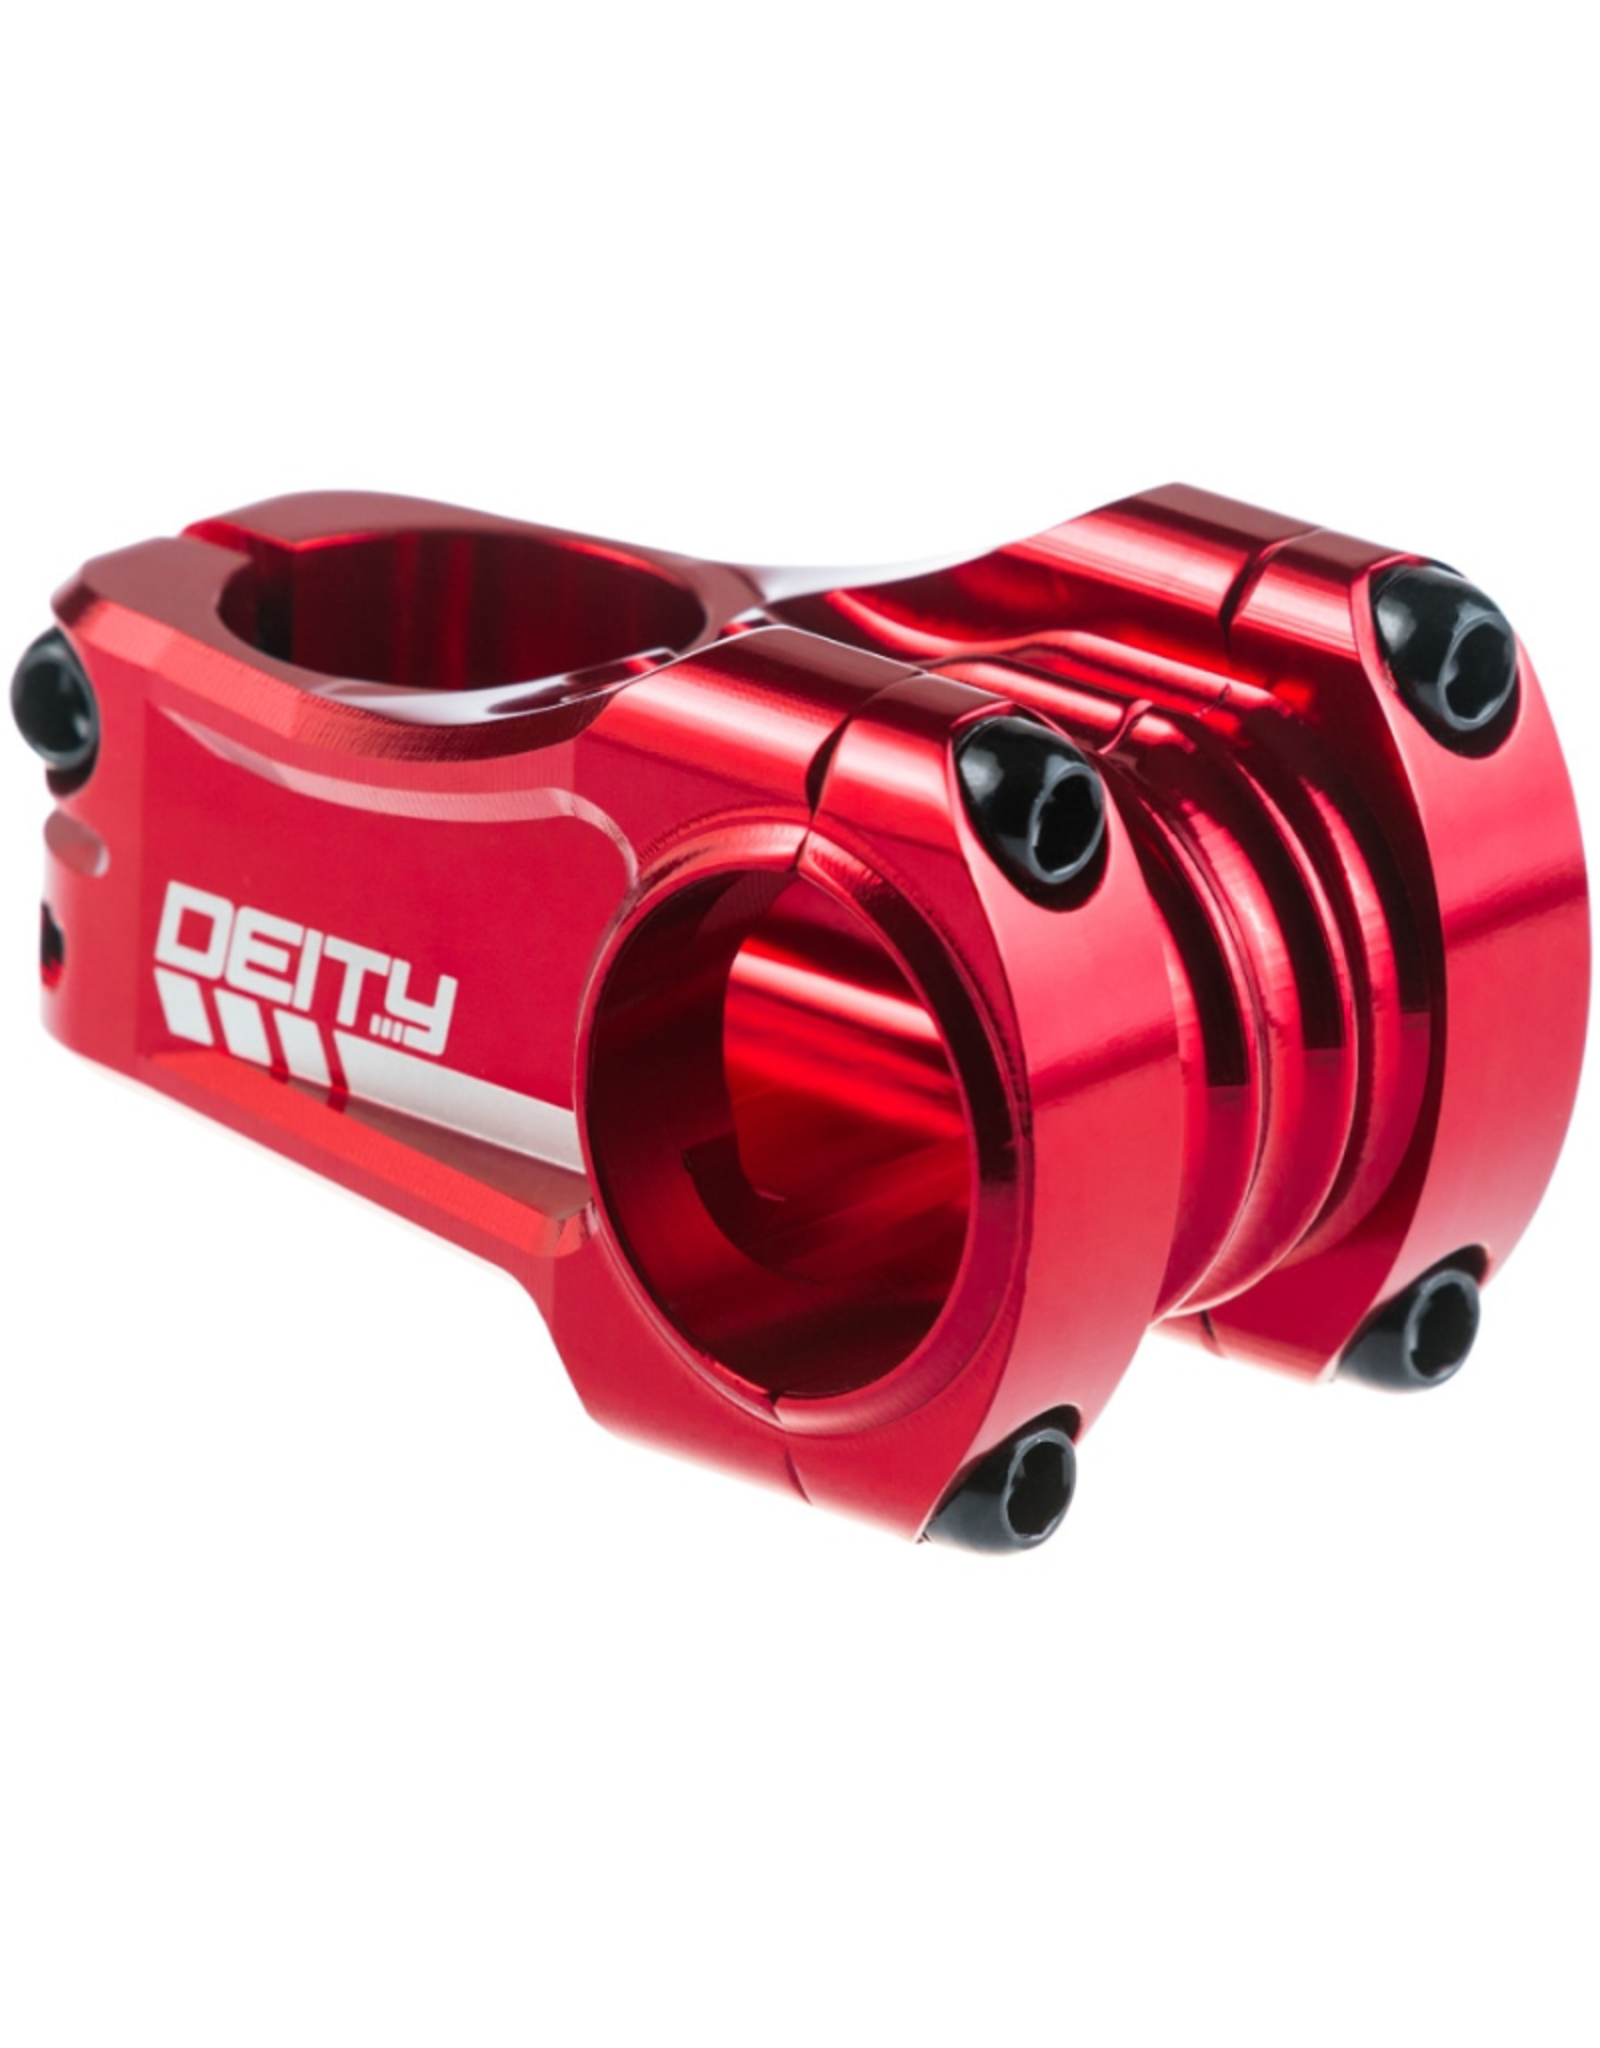 Deity Components Deity Copperhead Stem 31.8 50mm Red